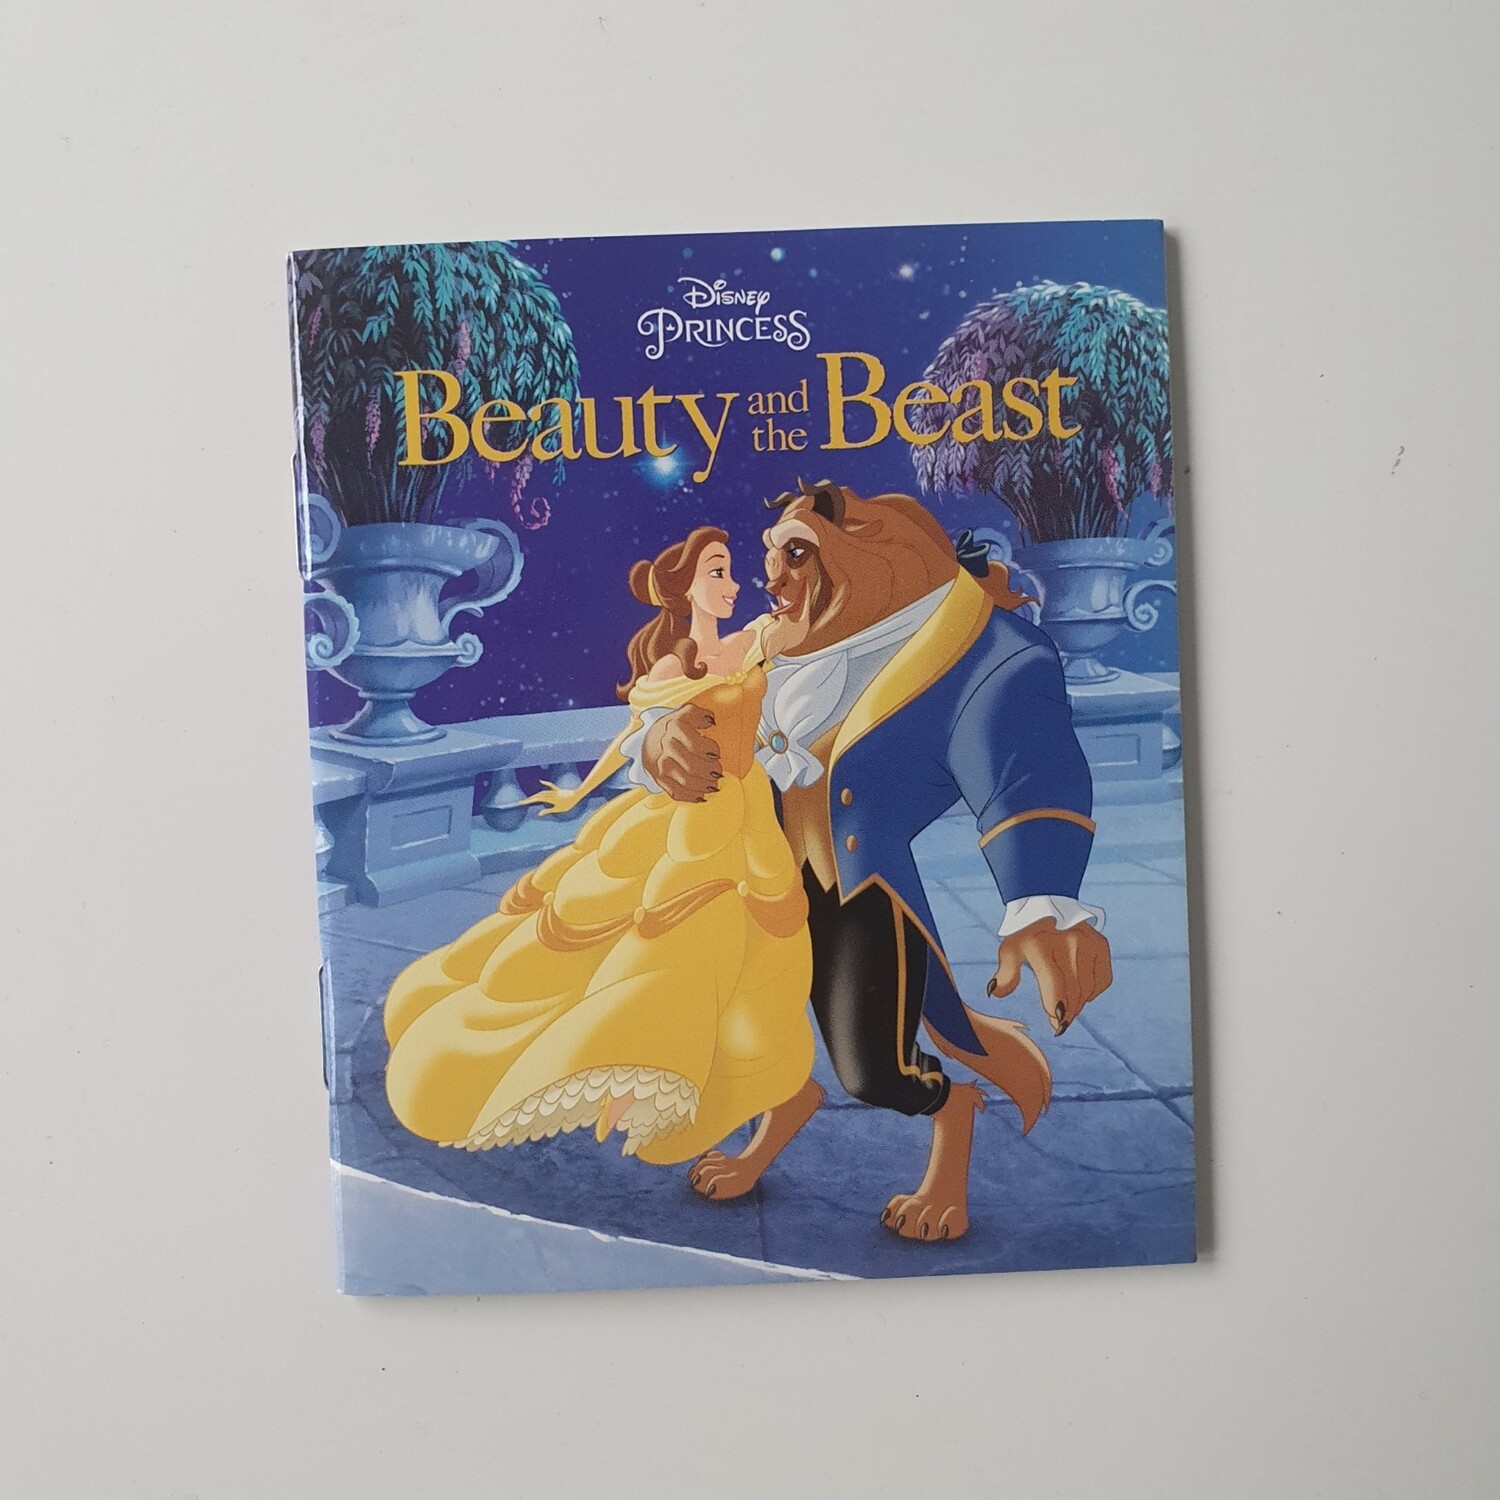 Disney Mini Notepads - made from paperback books - come with metal book corners